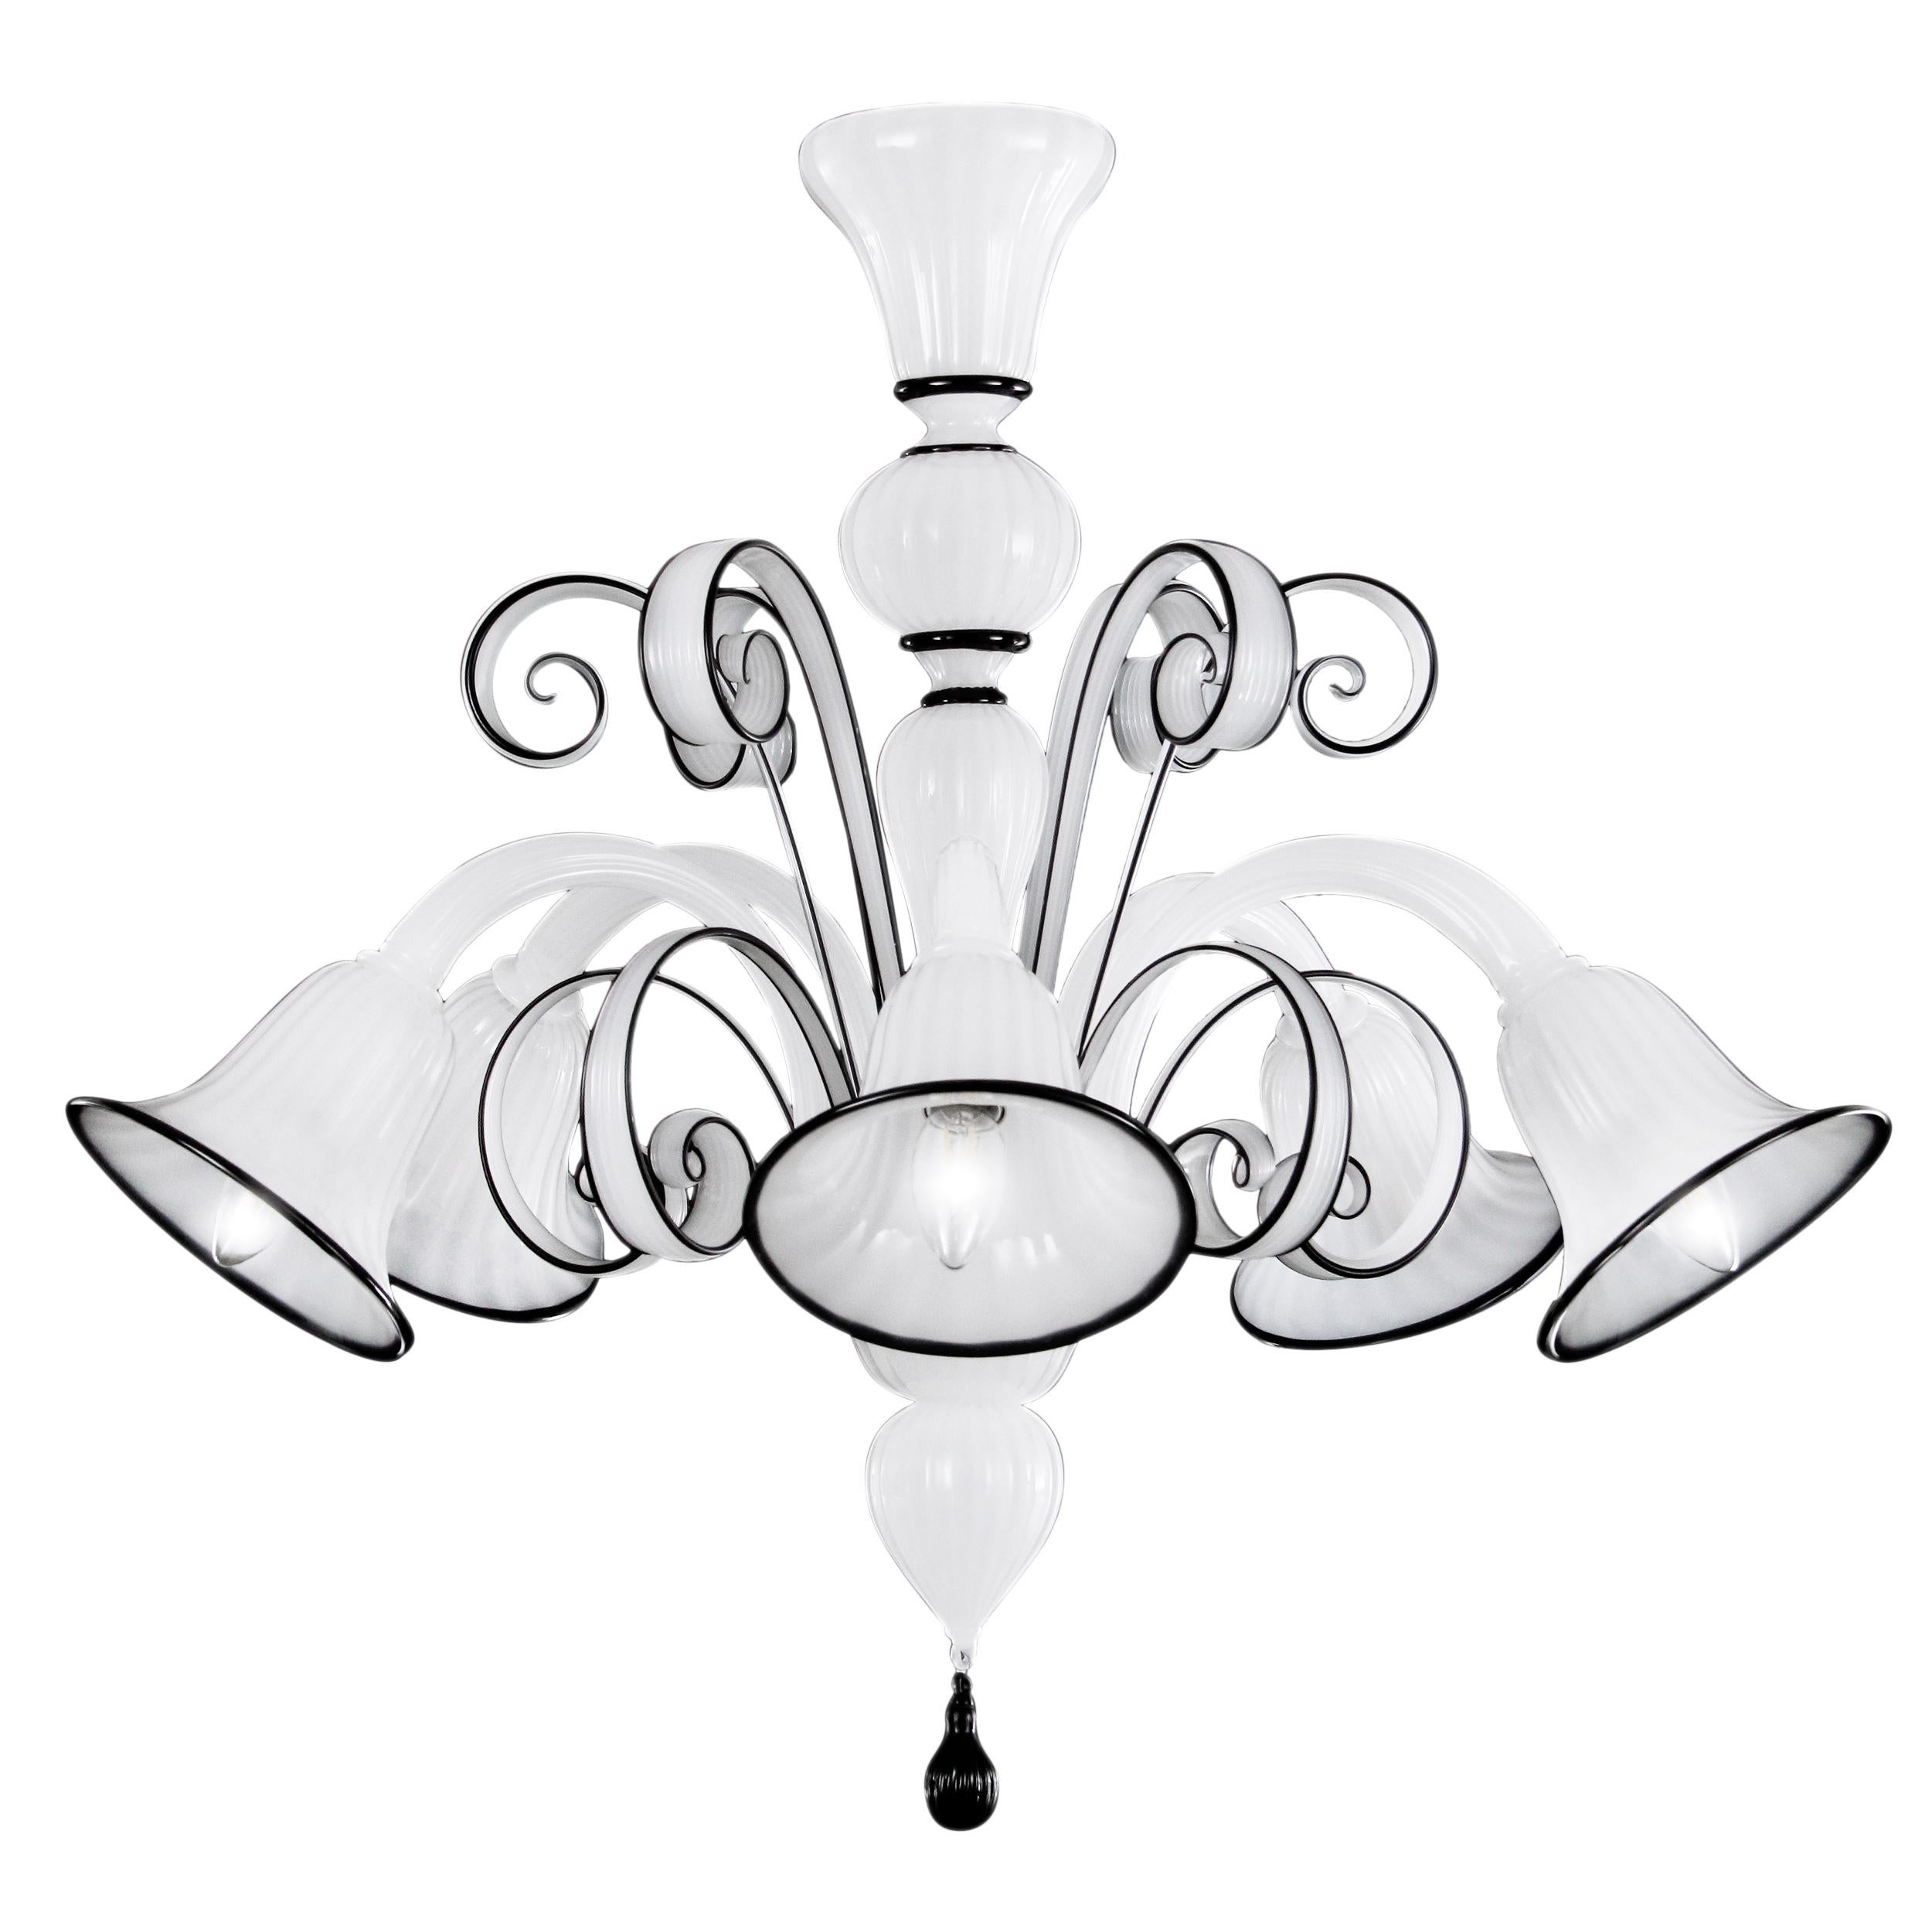 Chandelier 5 Arms White Murano Glass, Black Details by Multiforme   For Sale